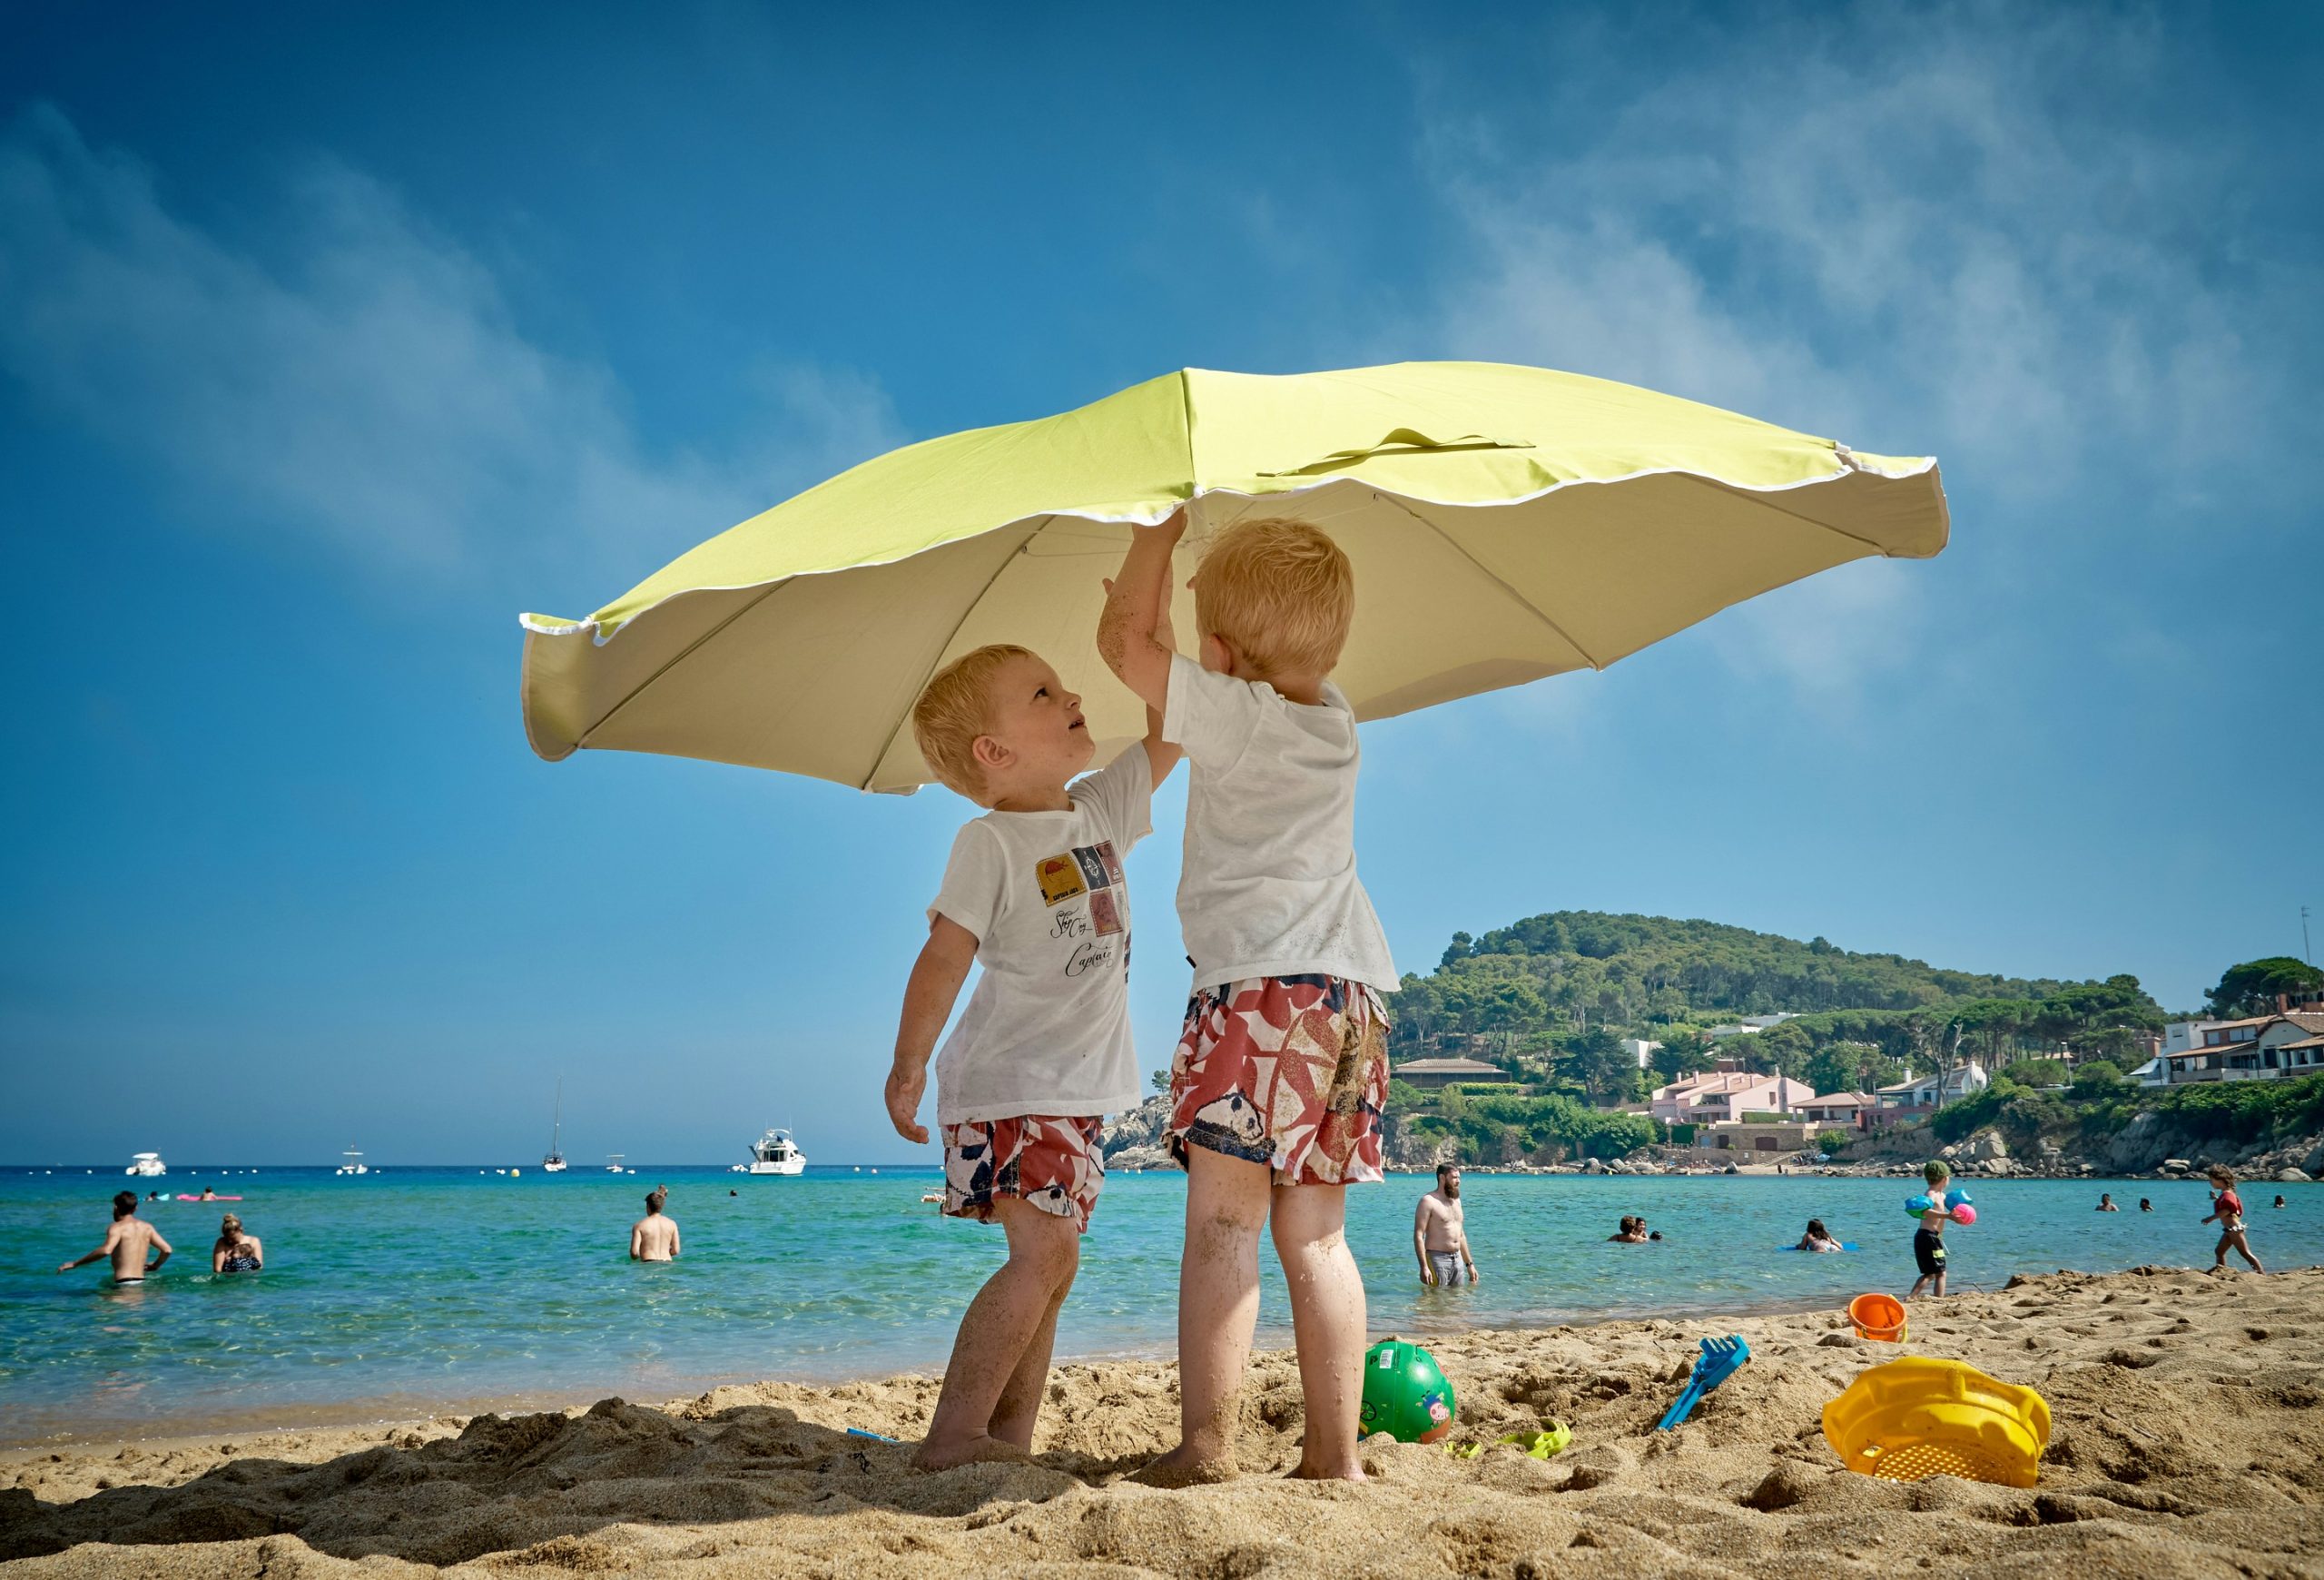 discover practical tips and helpful advice for traveling with kids to make your family trips enjoyable and stress-free.